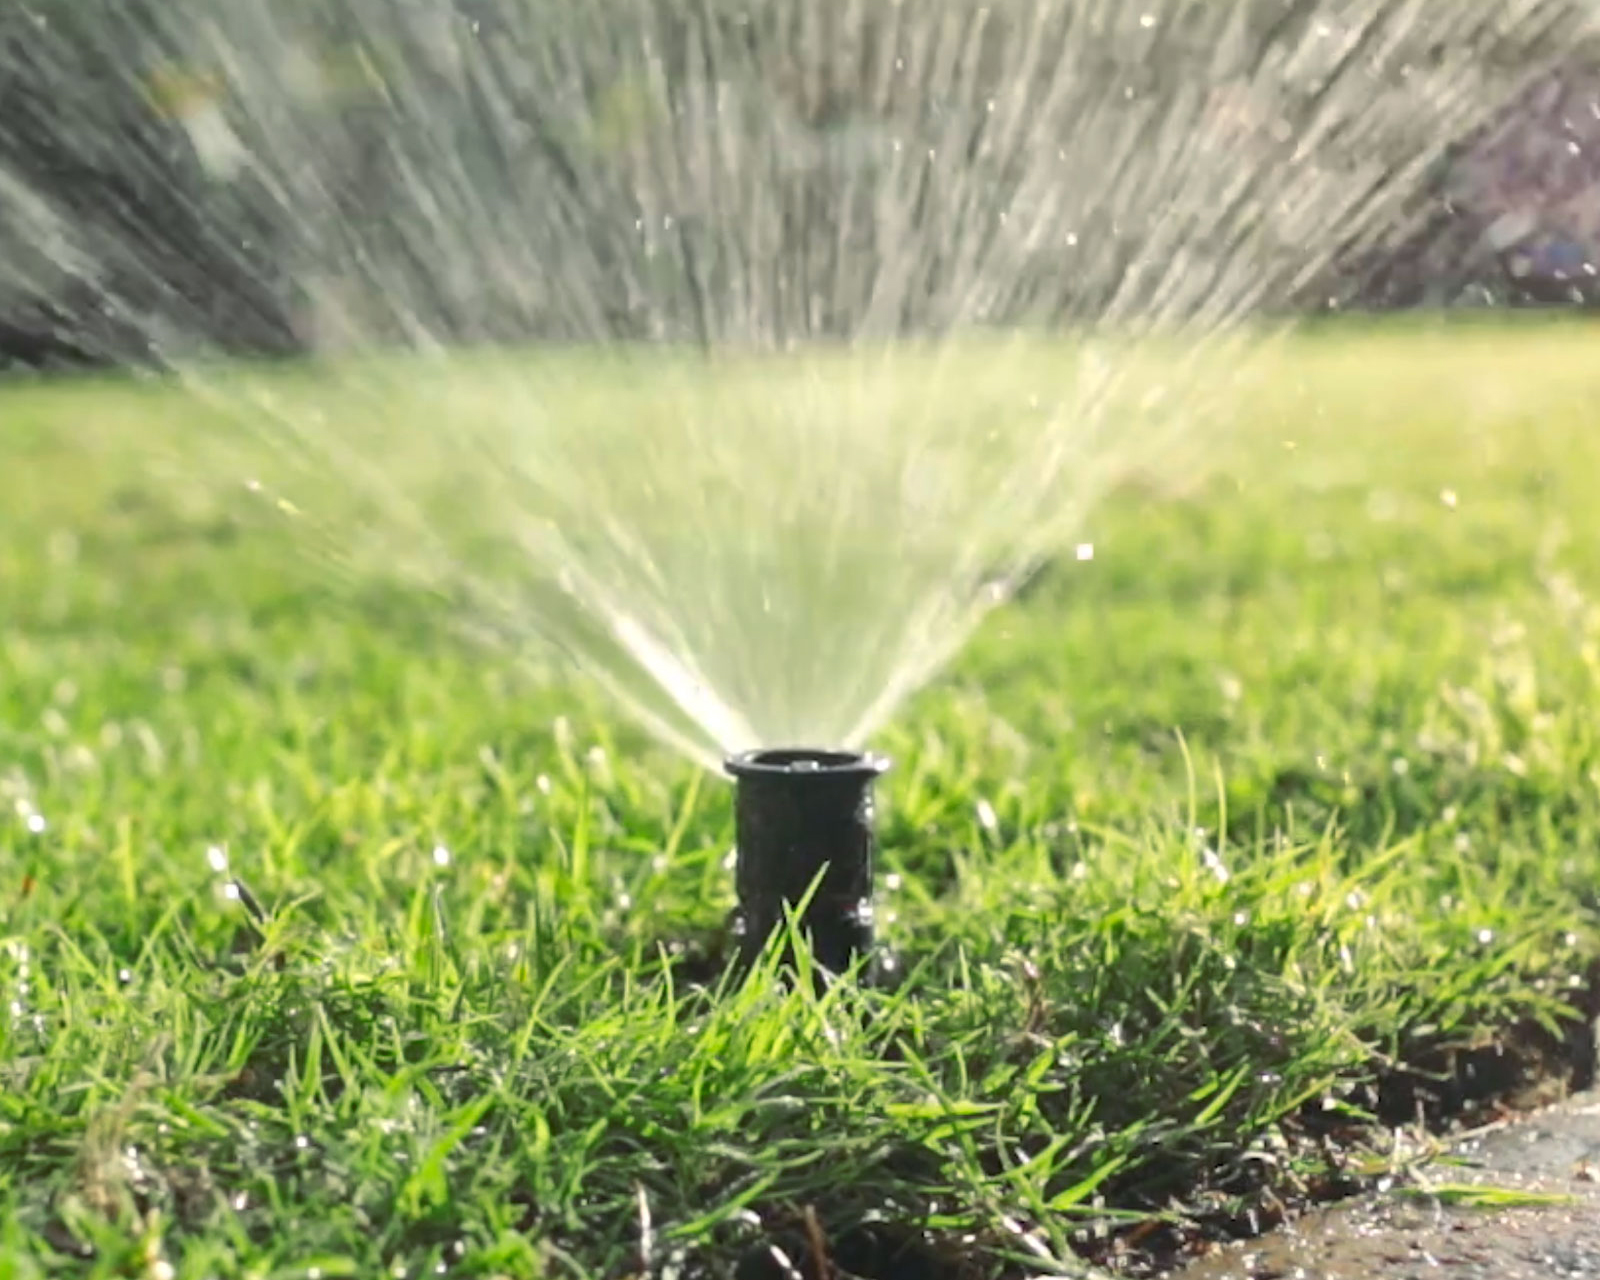 How to clean Sprinkler Nozzles yourself - Holman Industries